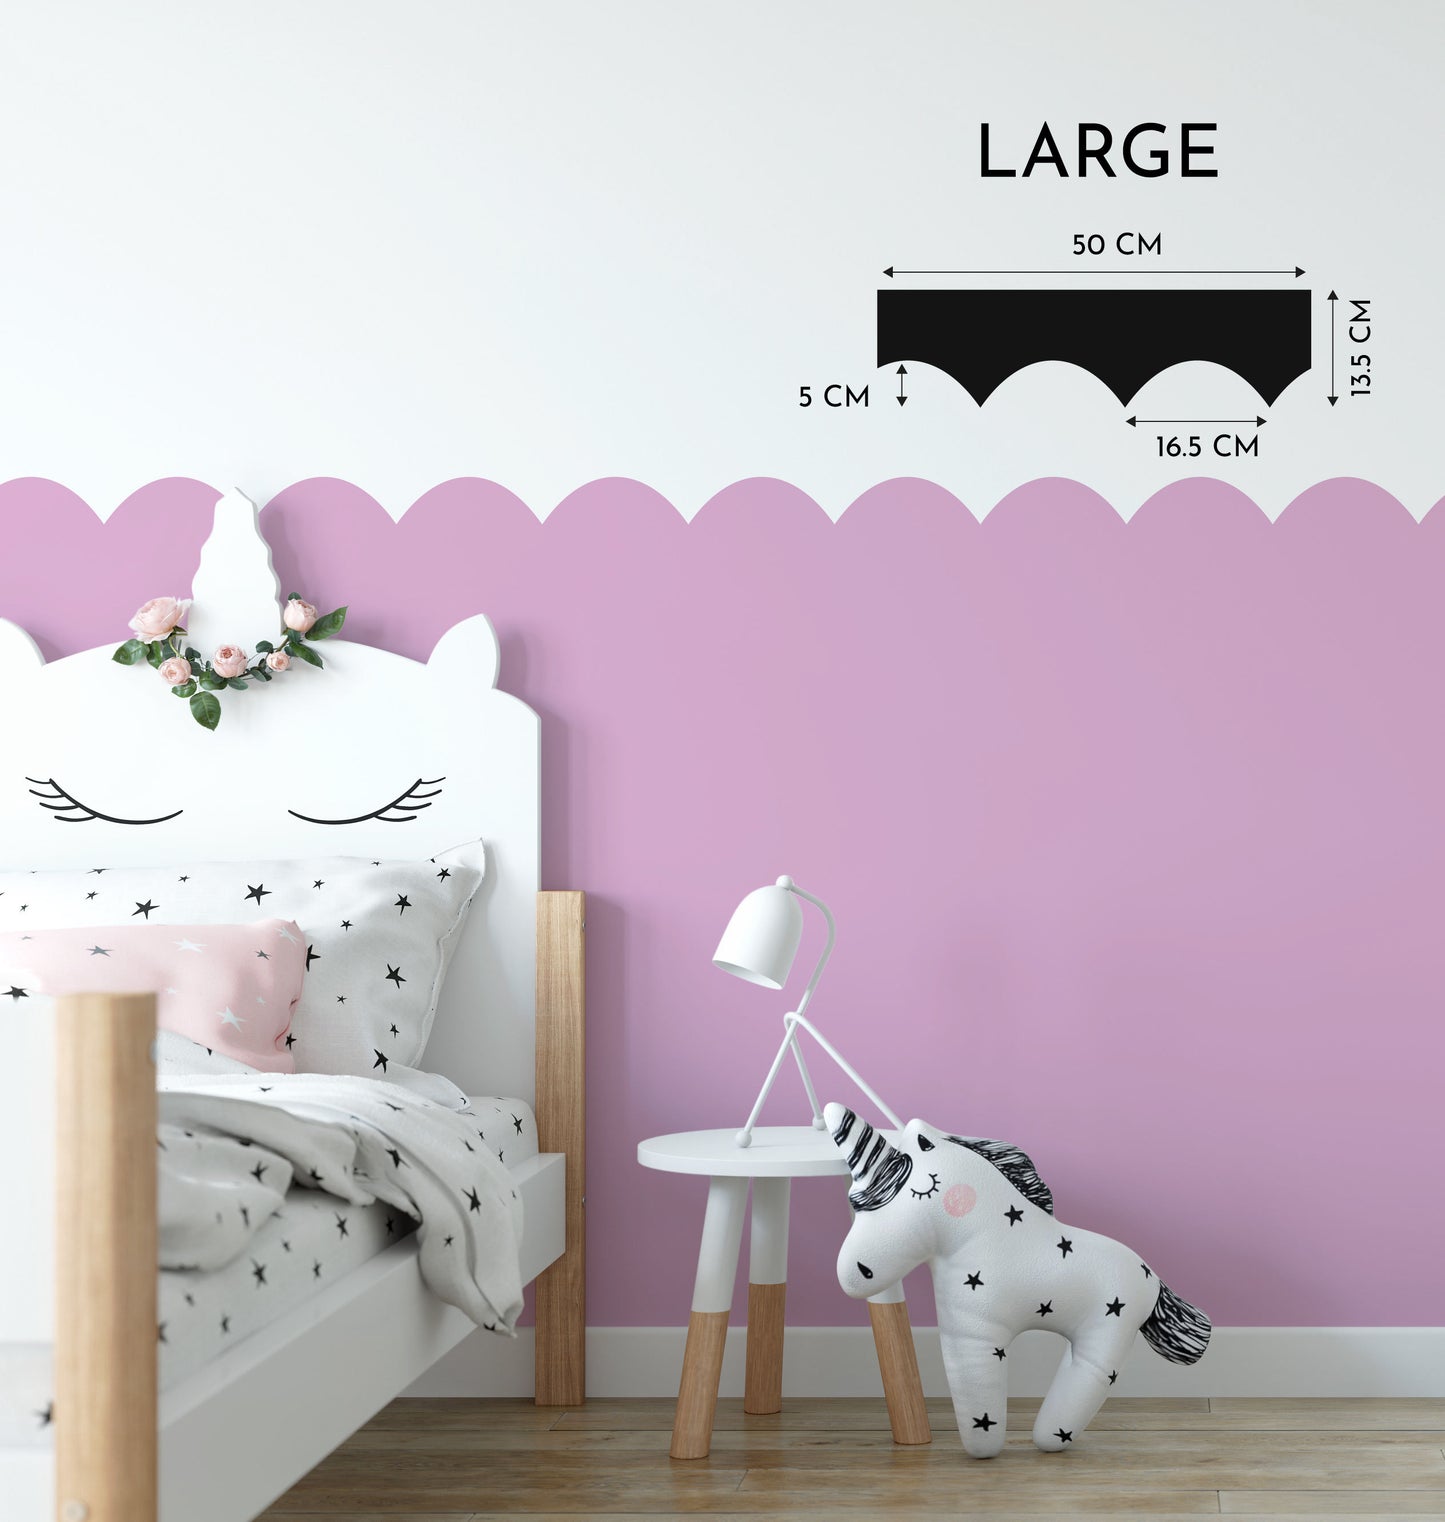 Nursery Rooms Painting Boarder Stencil | Stencils For Painting | Wall Paint Stencils For Kids Children's Bedrooms Wall Decor